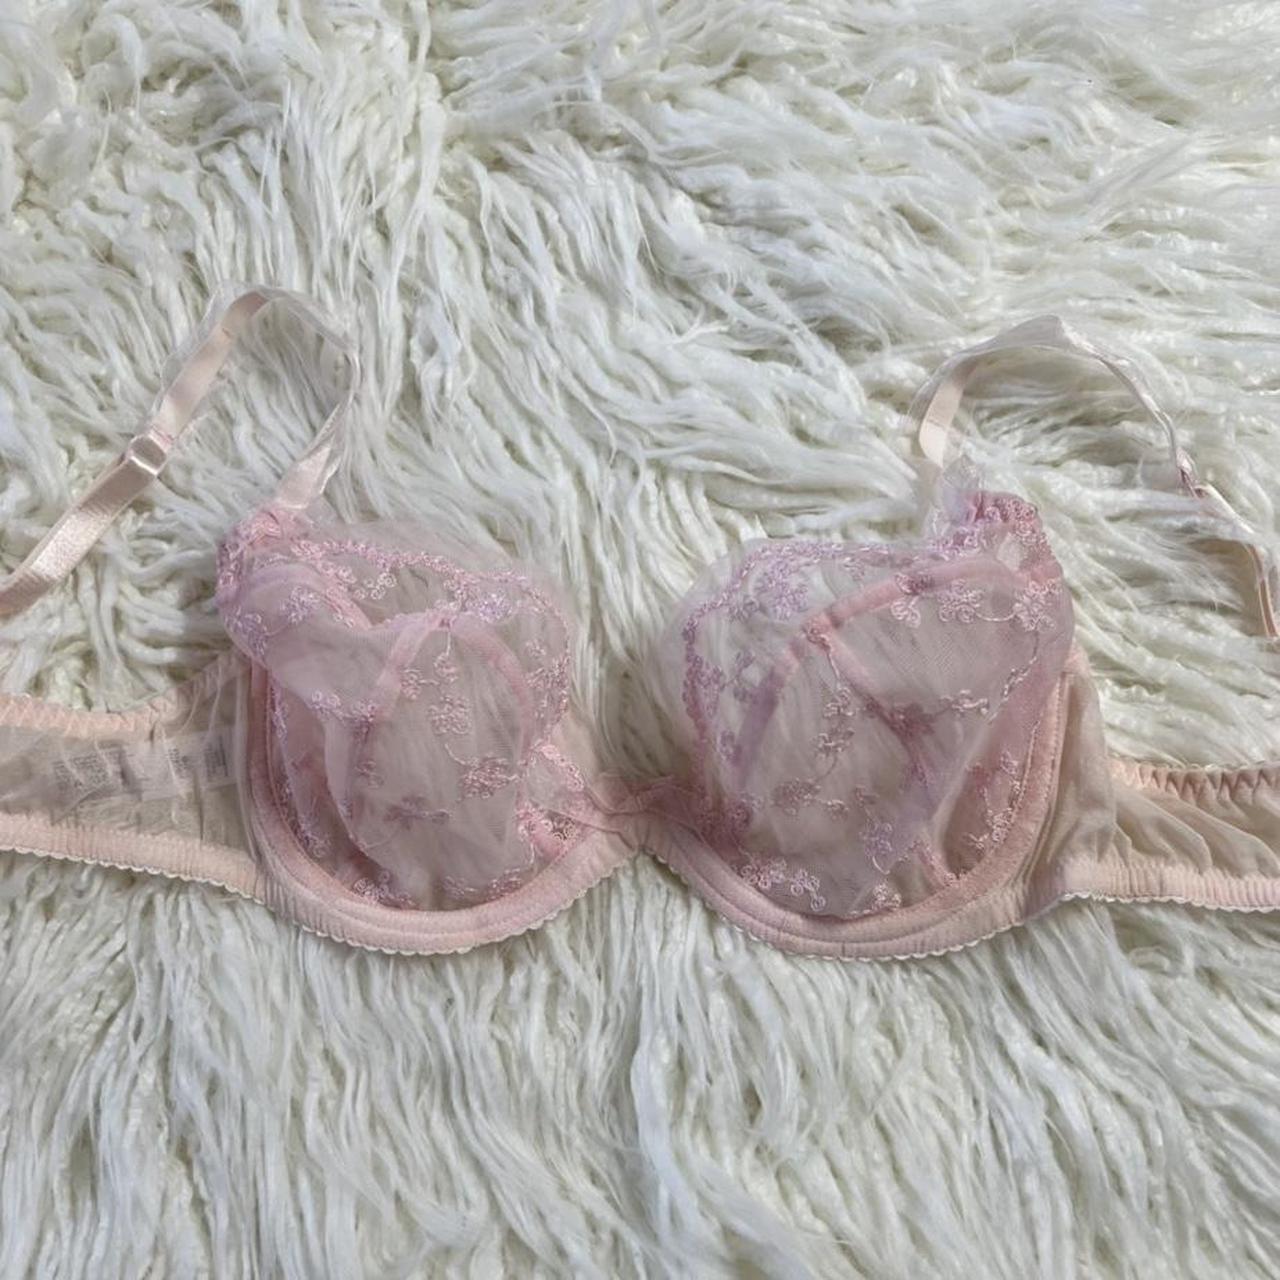 Product Image 1 - Dainty pink mesh bra with